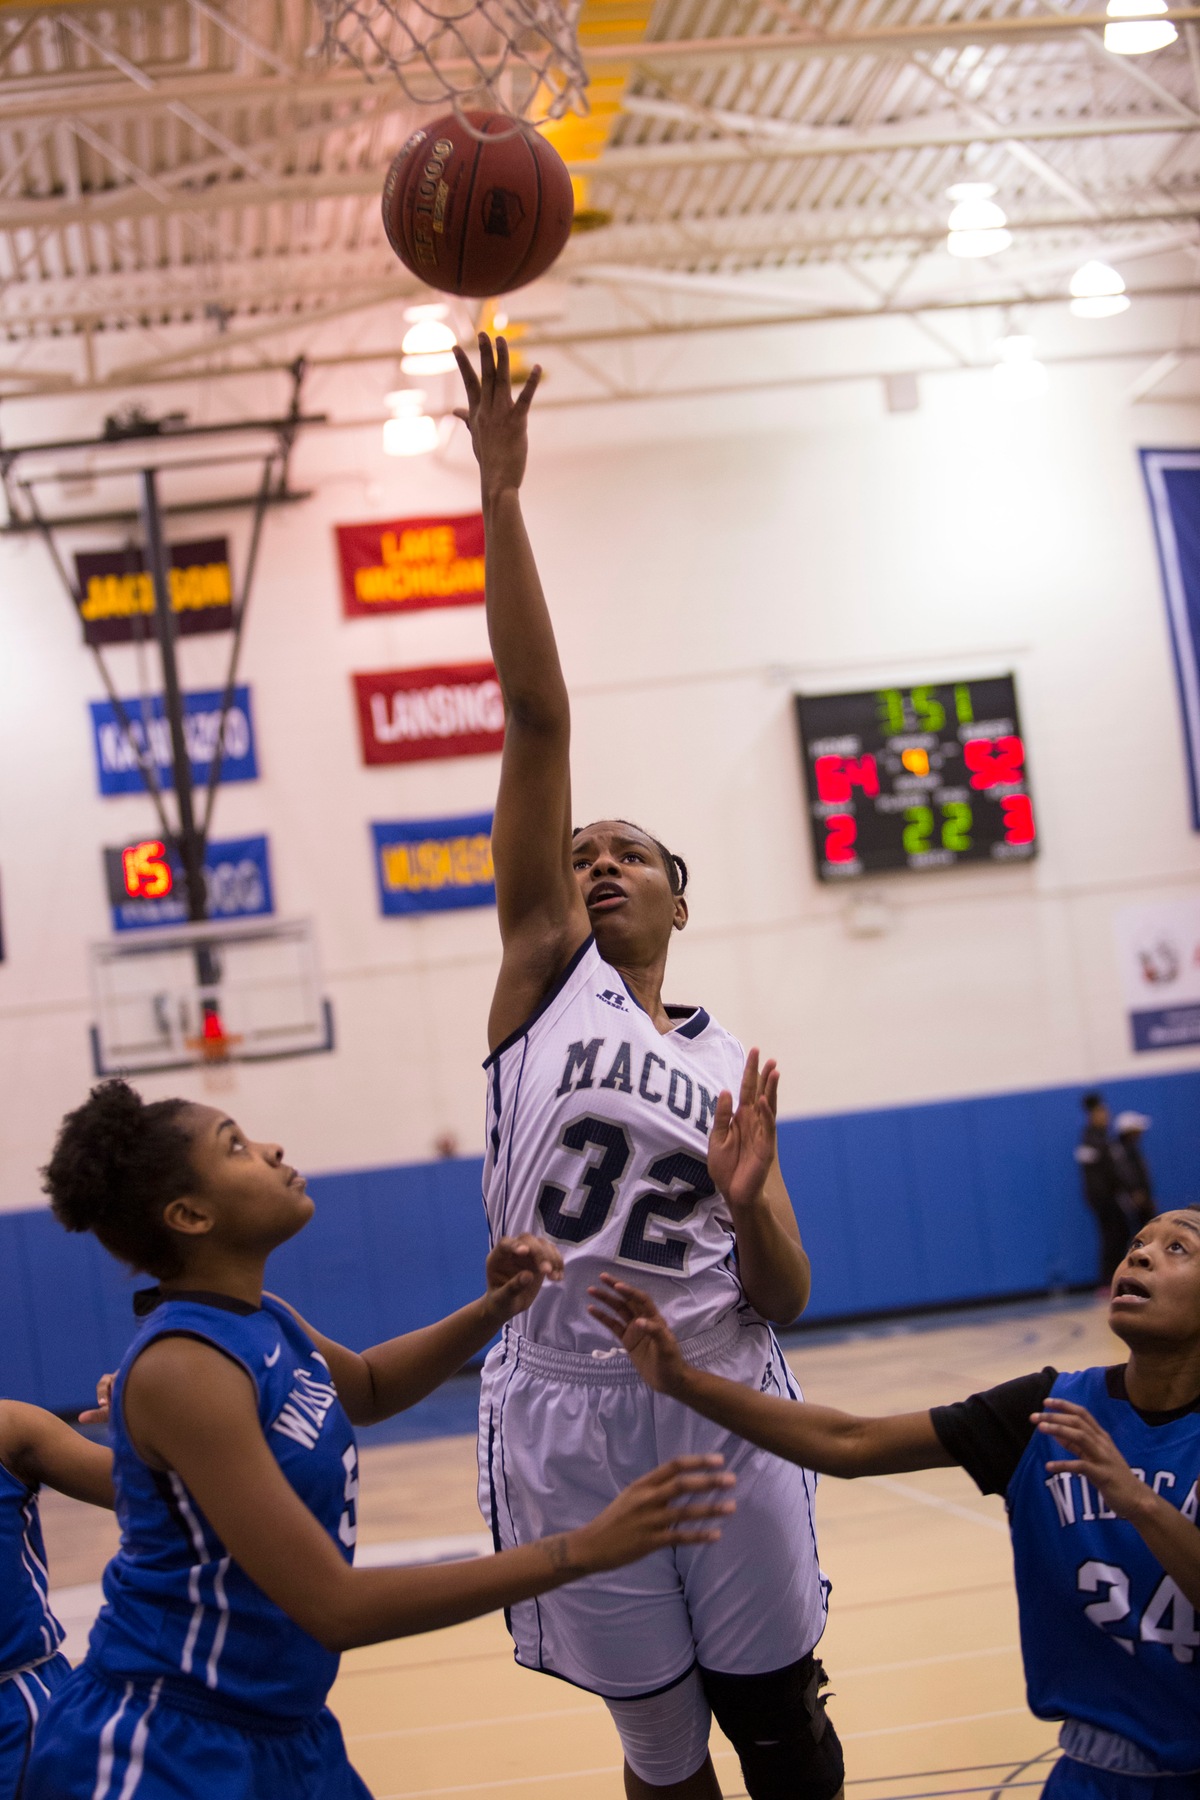 Macomb CC women's basketball player goes in for the layup.